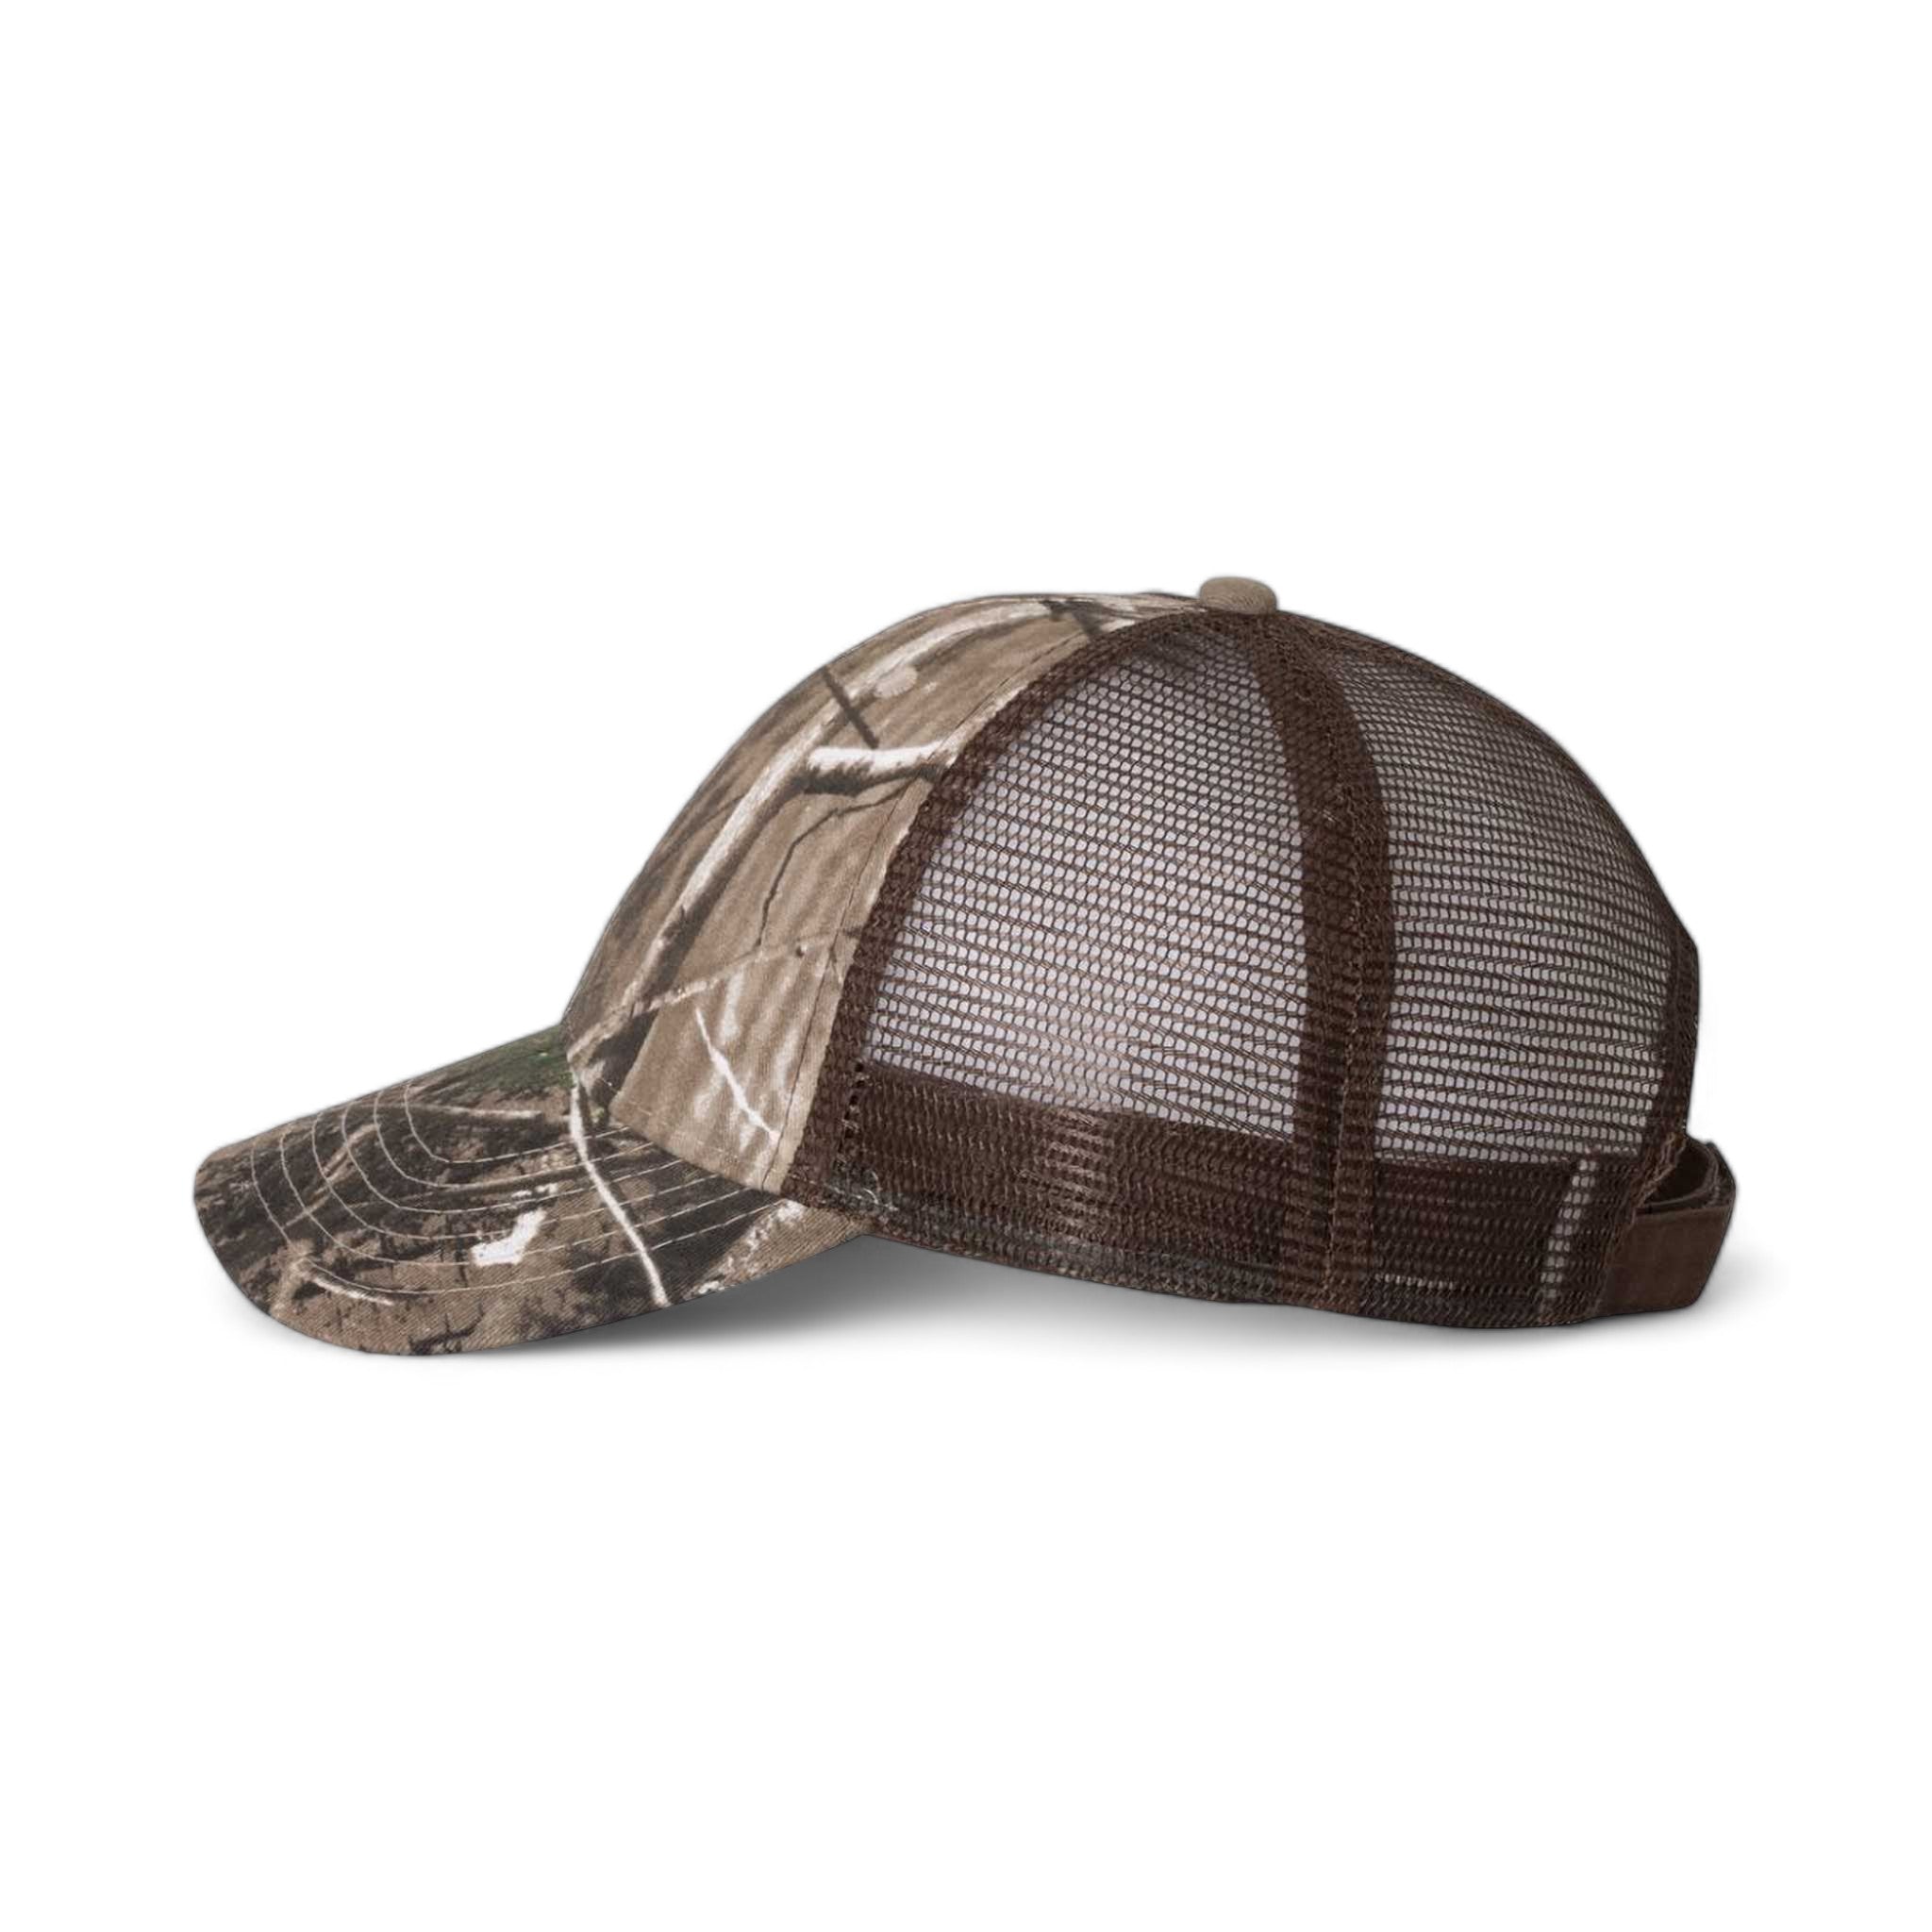 Side view of Kati LC5M custom hat in realtree ap and brown